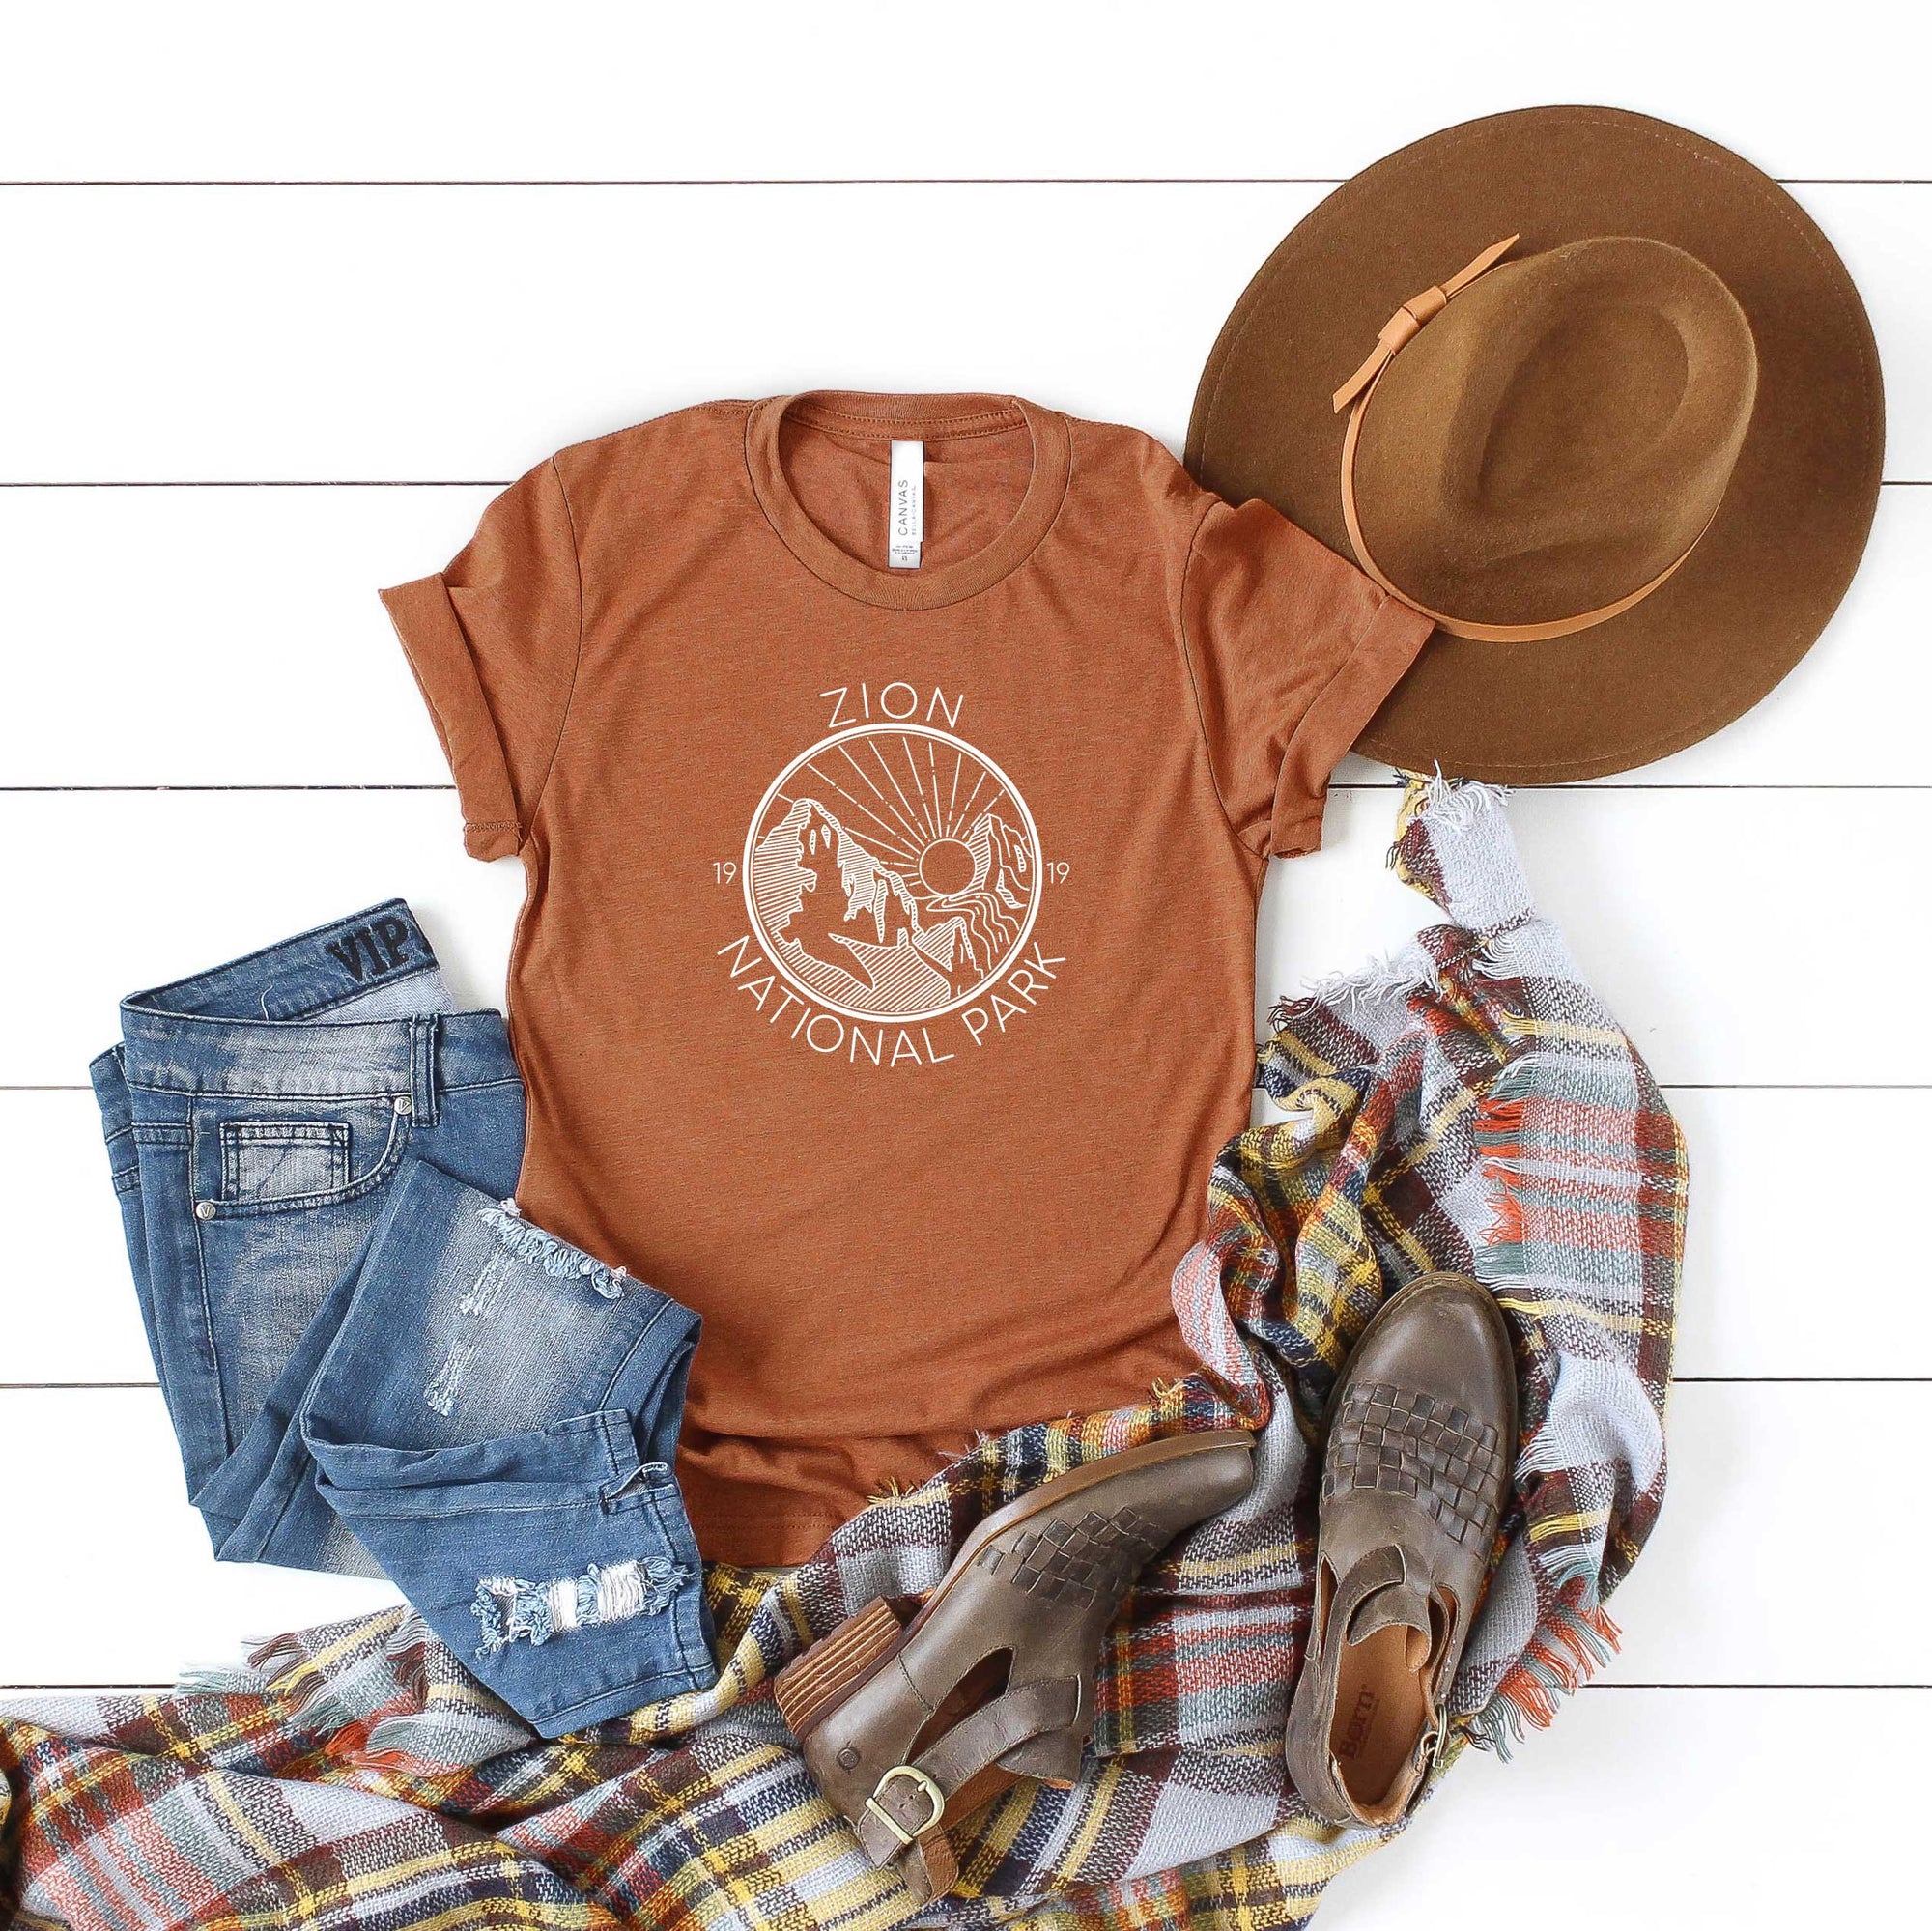 Burnt orange tee with cuffs rolled, features white ink design of Zion National Park with a sunrising over the moutnains in a circle design. Flat lay shows the shirt paired with a large brim brown hat, distressed denim and buckle ankle boots